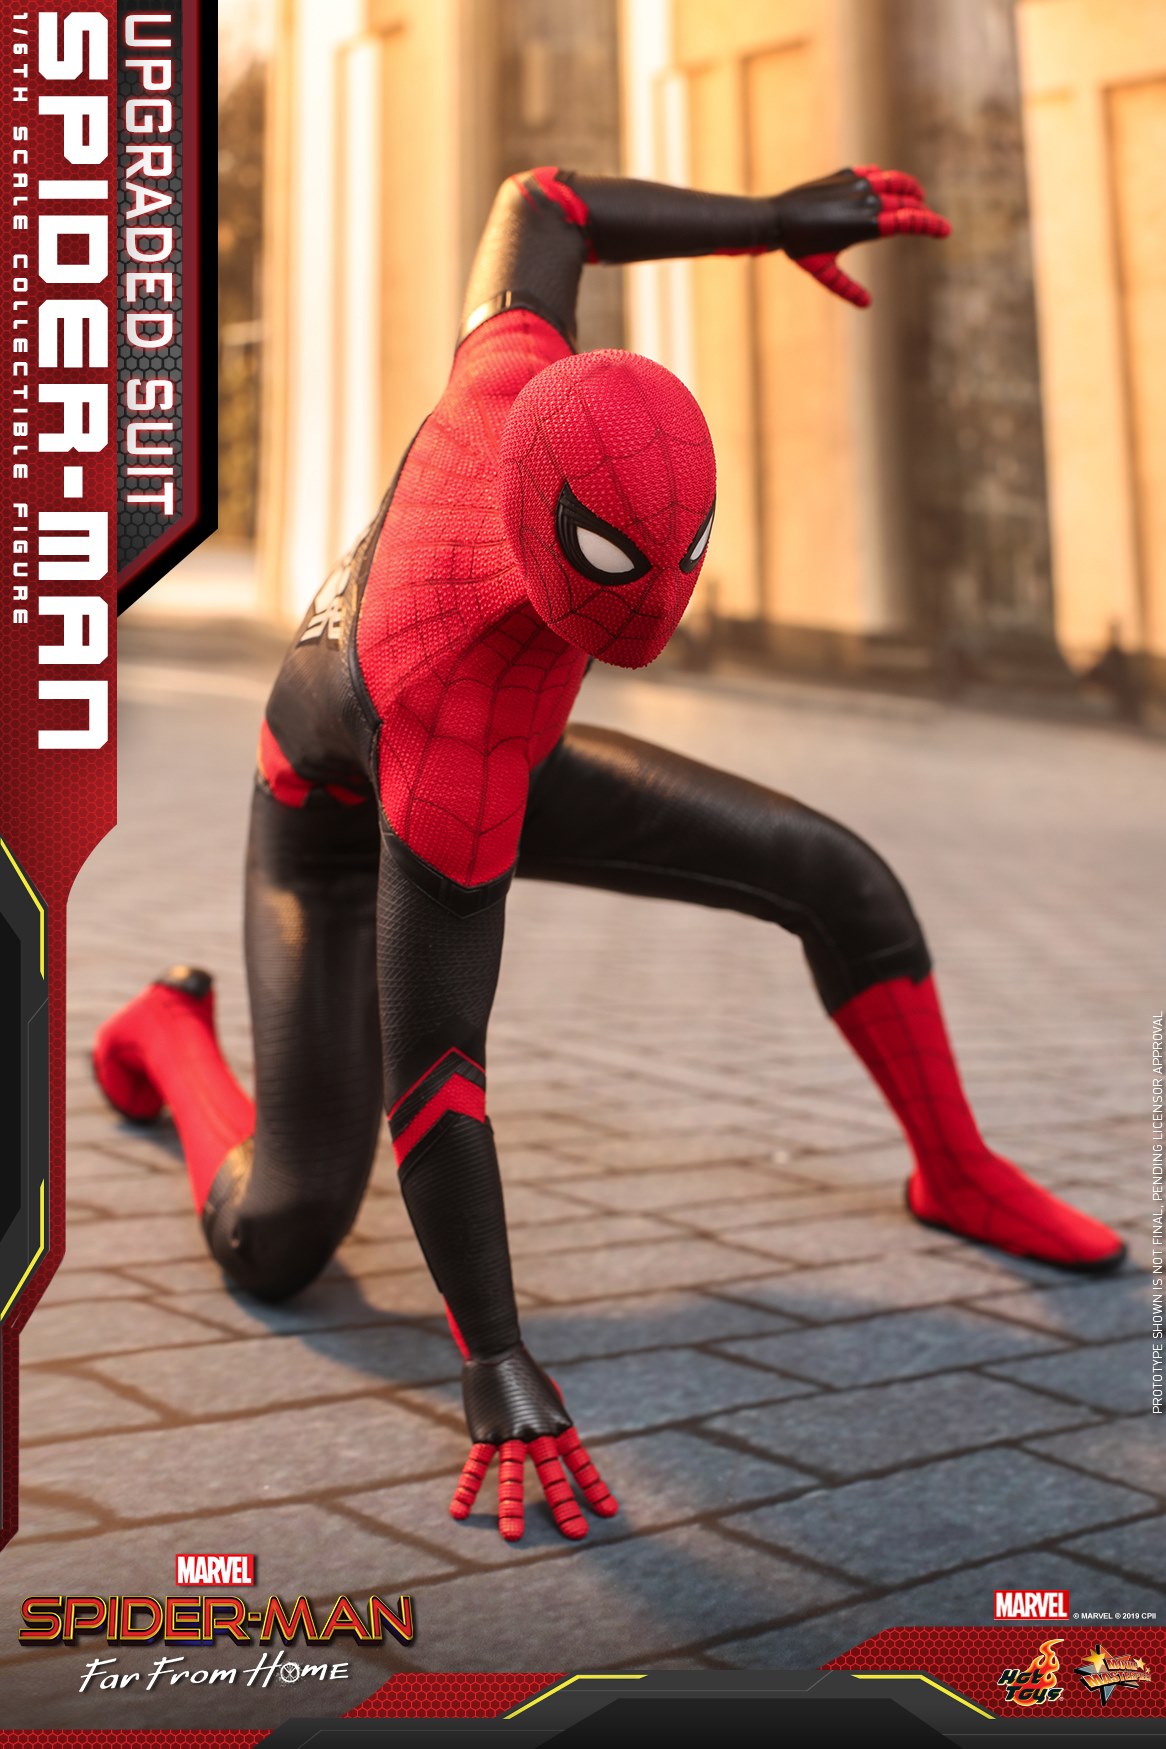 Hot Toys Upgraded Suit Spider-Man Far From Home Figure Up for Order